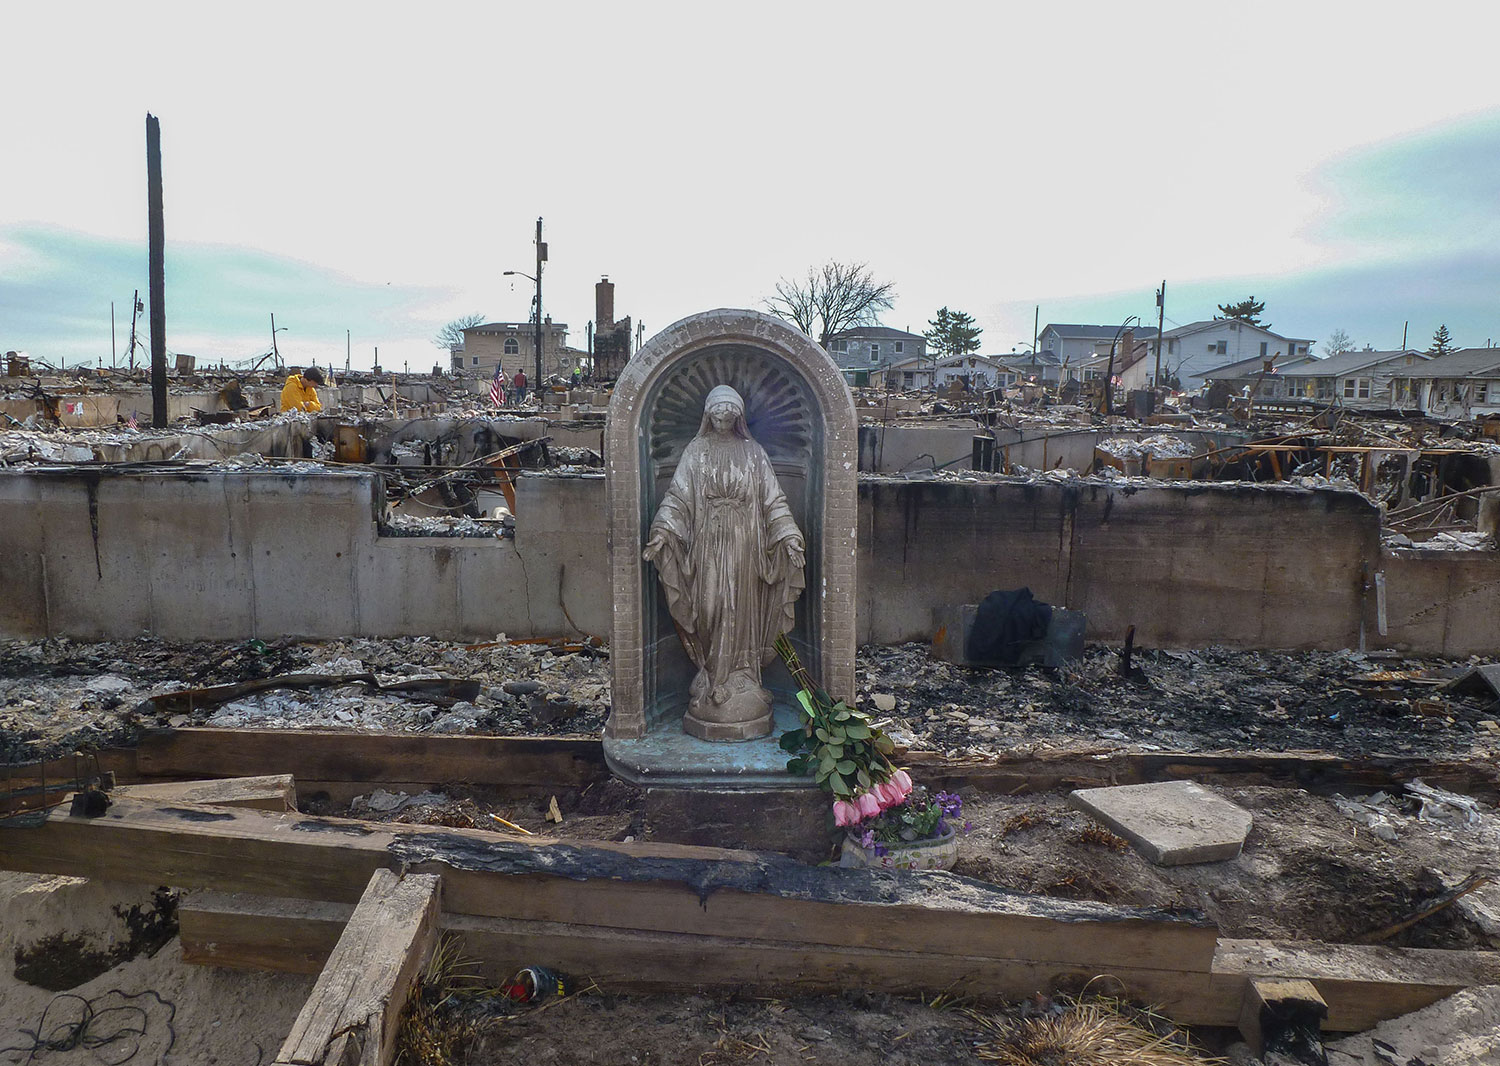 After the Breezy Point Fire, Superstorm Sandy 2012